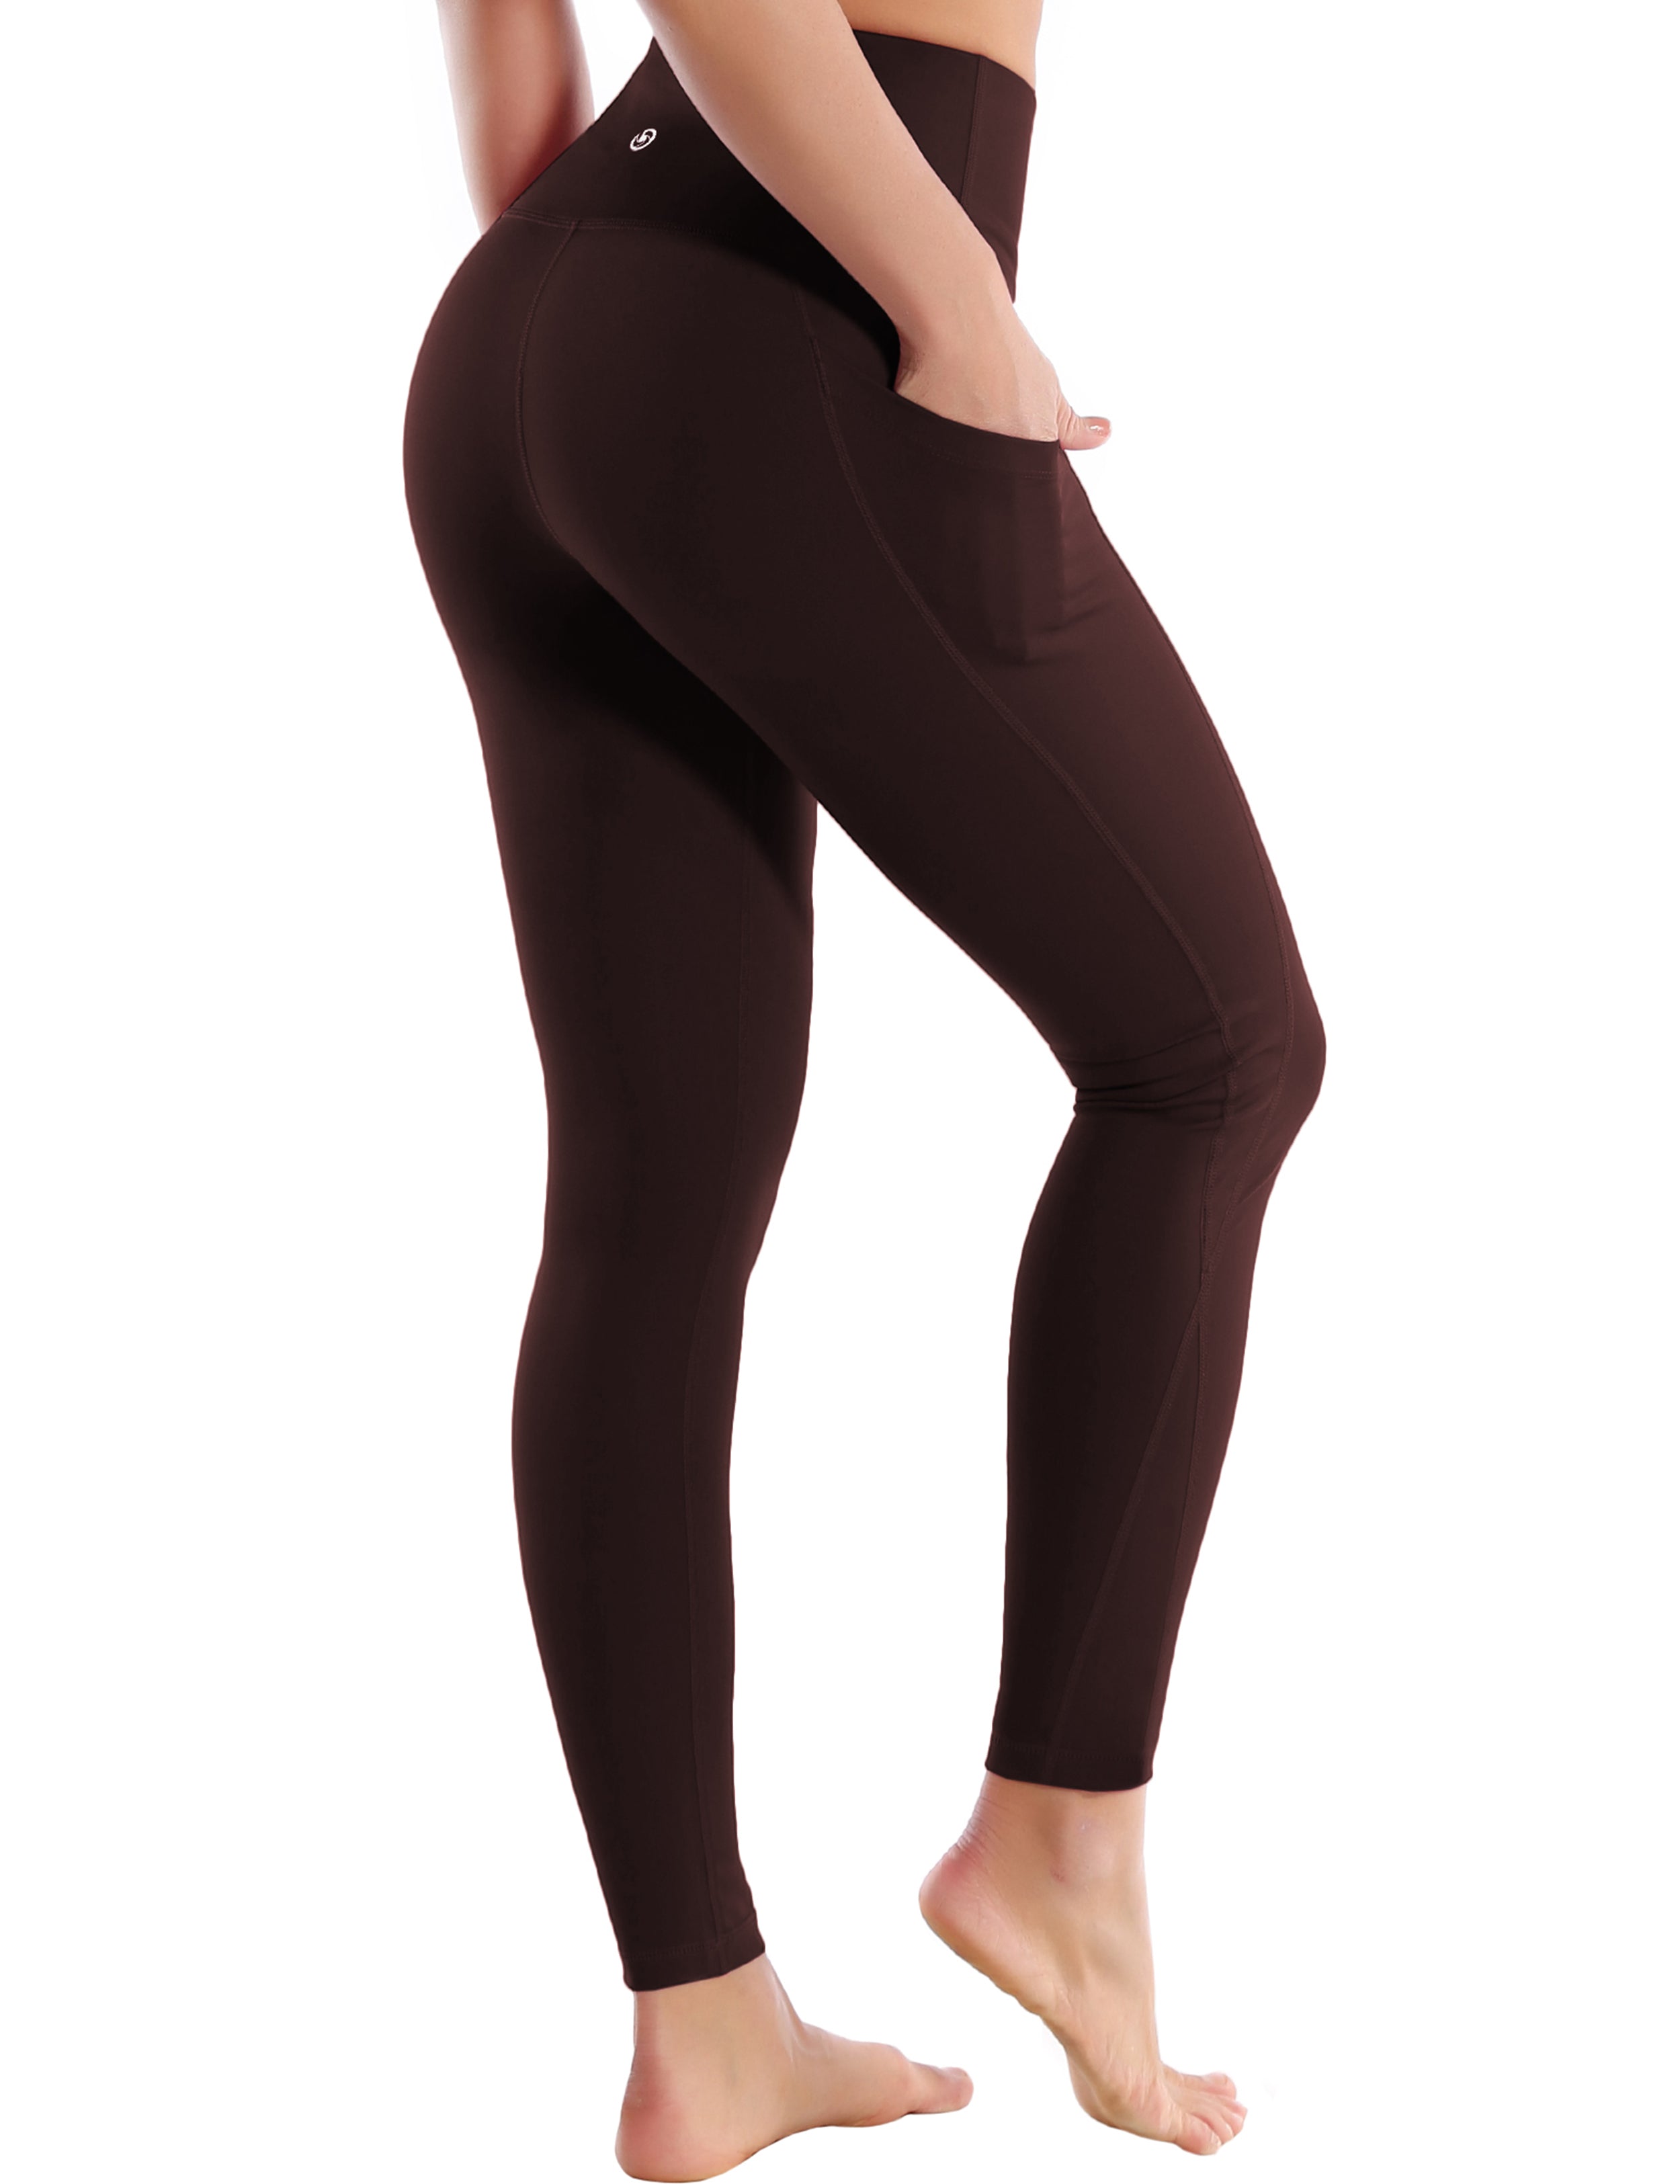 High Waist Side Pockets Running Pants mahoganymaroon 75% Nylon, 25% Spandex Fabric doesn't attract lint easily 4-way stretch No see-through Moisture-wicking Tummy control Inner pocket